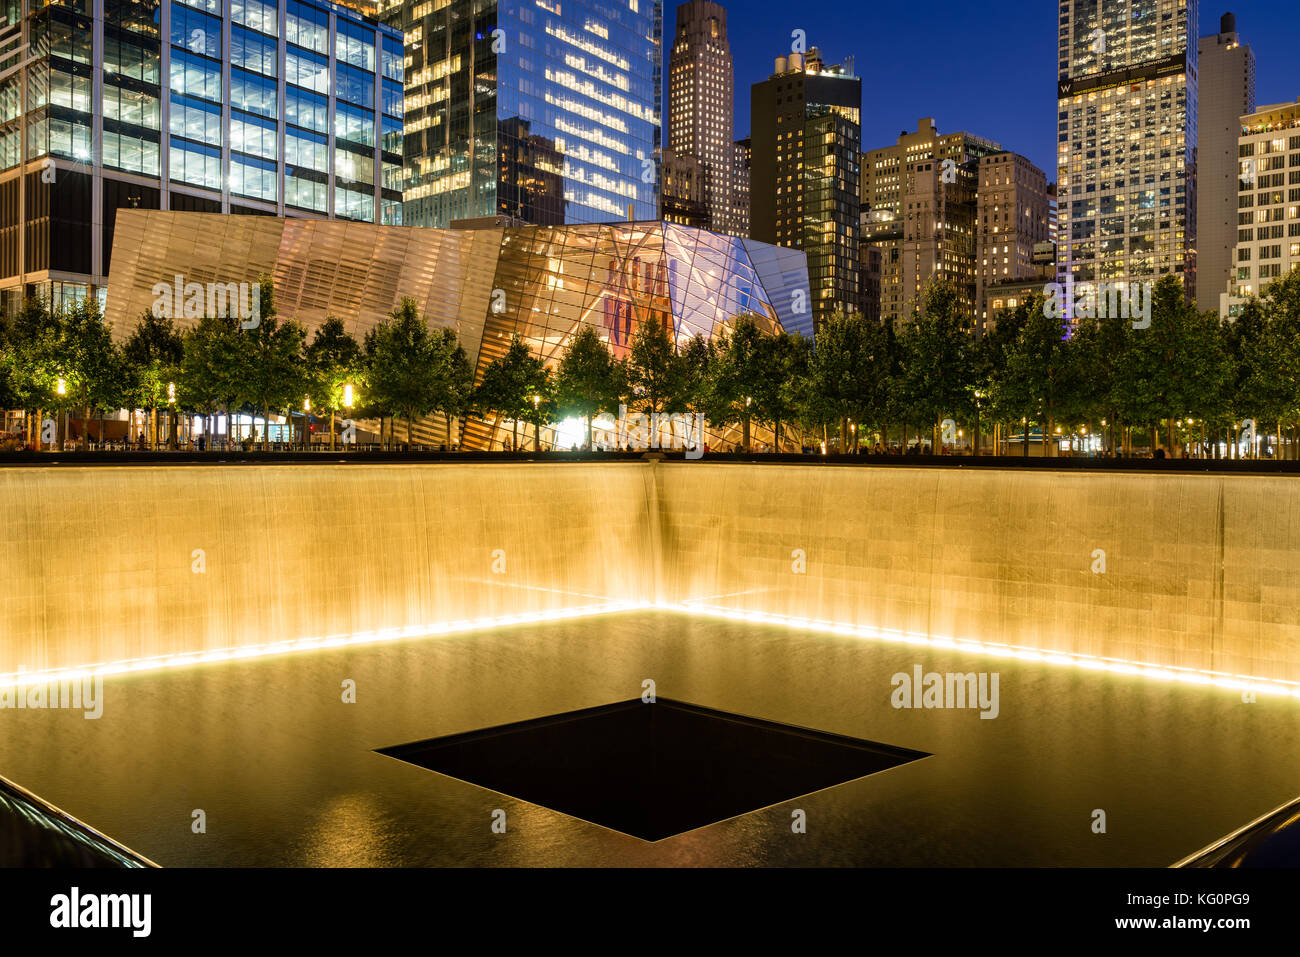 The North Reflecting Pool illuminated at twilight with view of the 9/11 Memorial & Museum. Manhattan Lower Manhattan, New York City Stock Photo